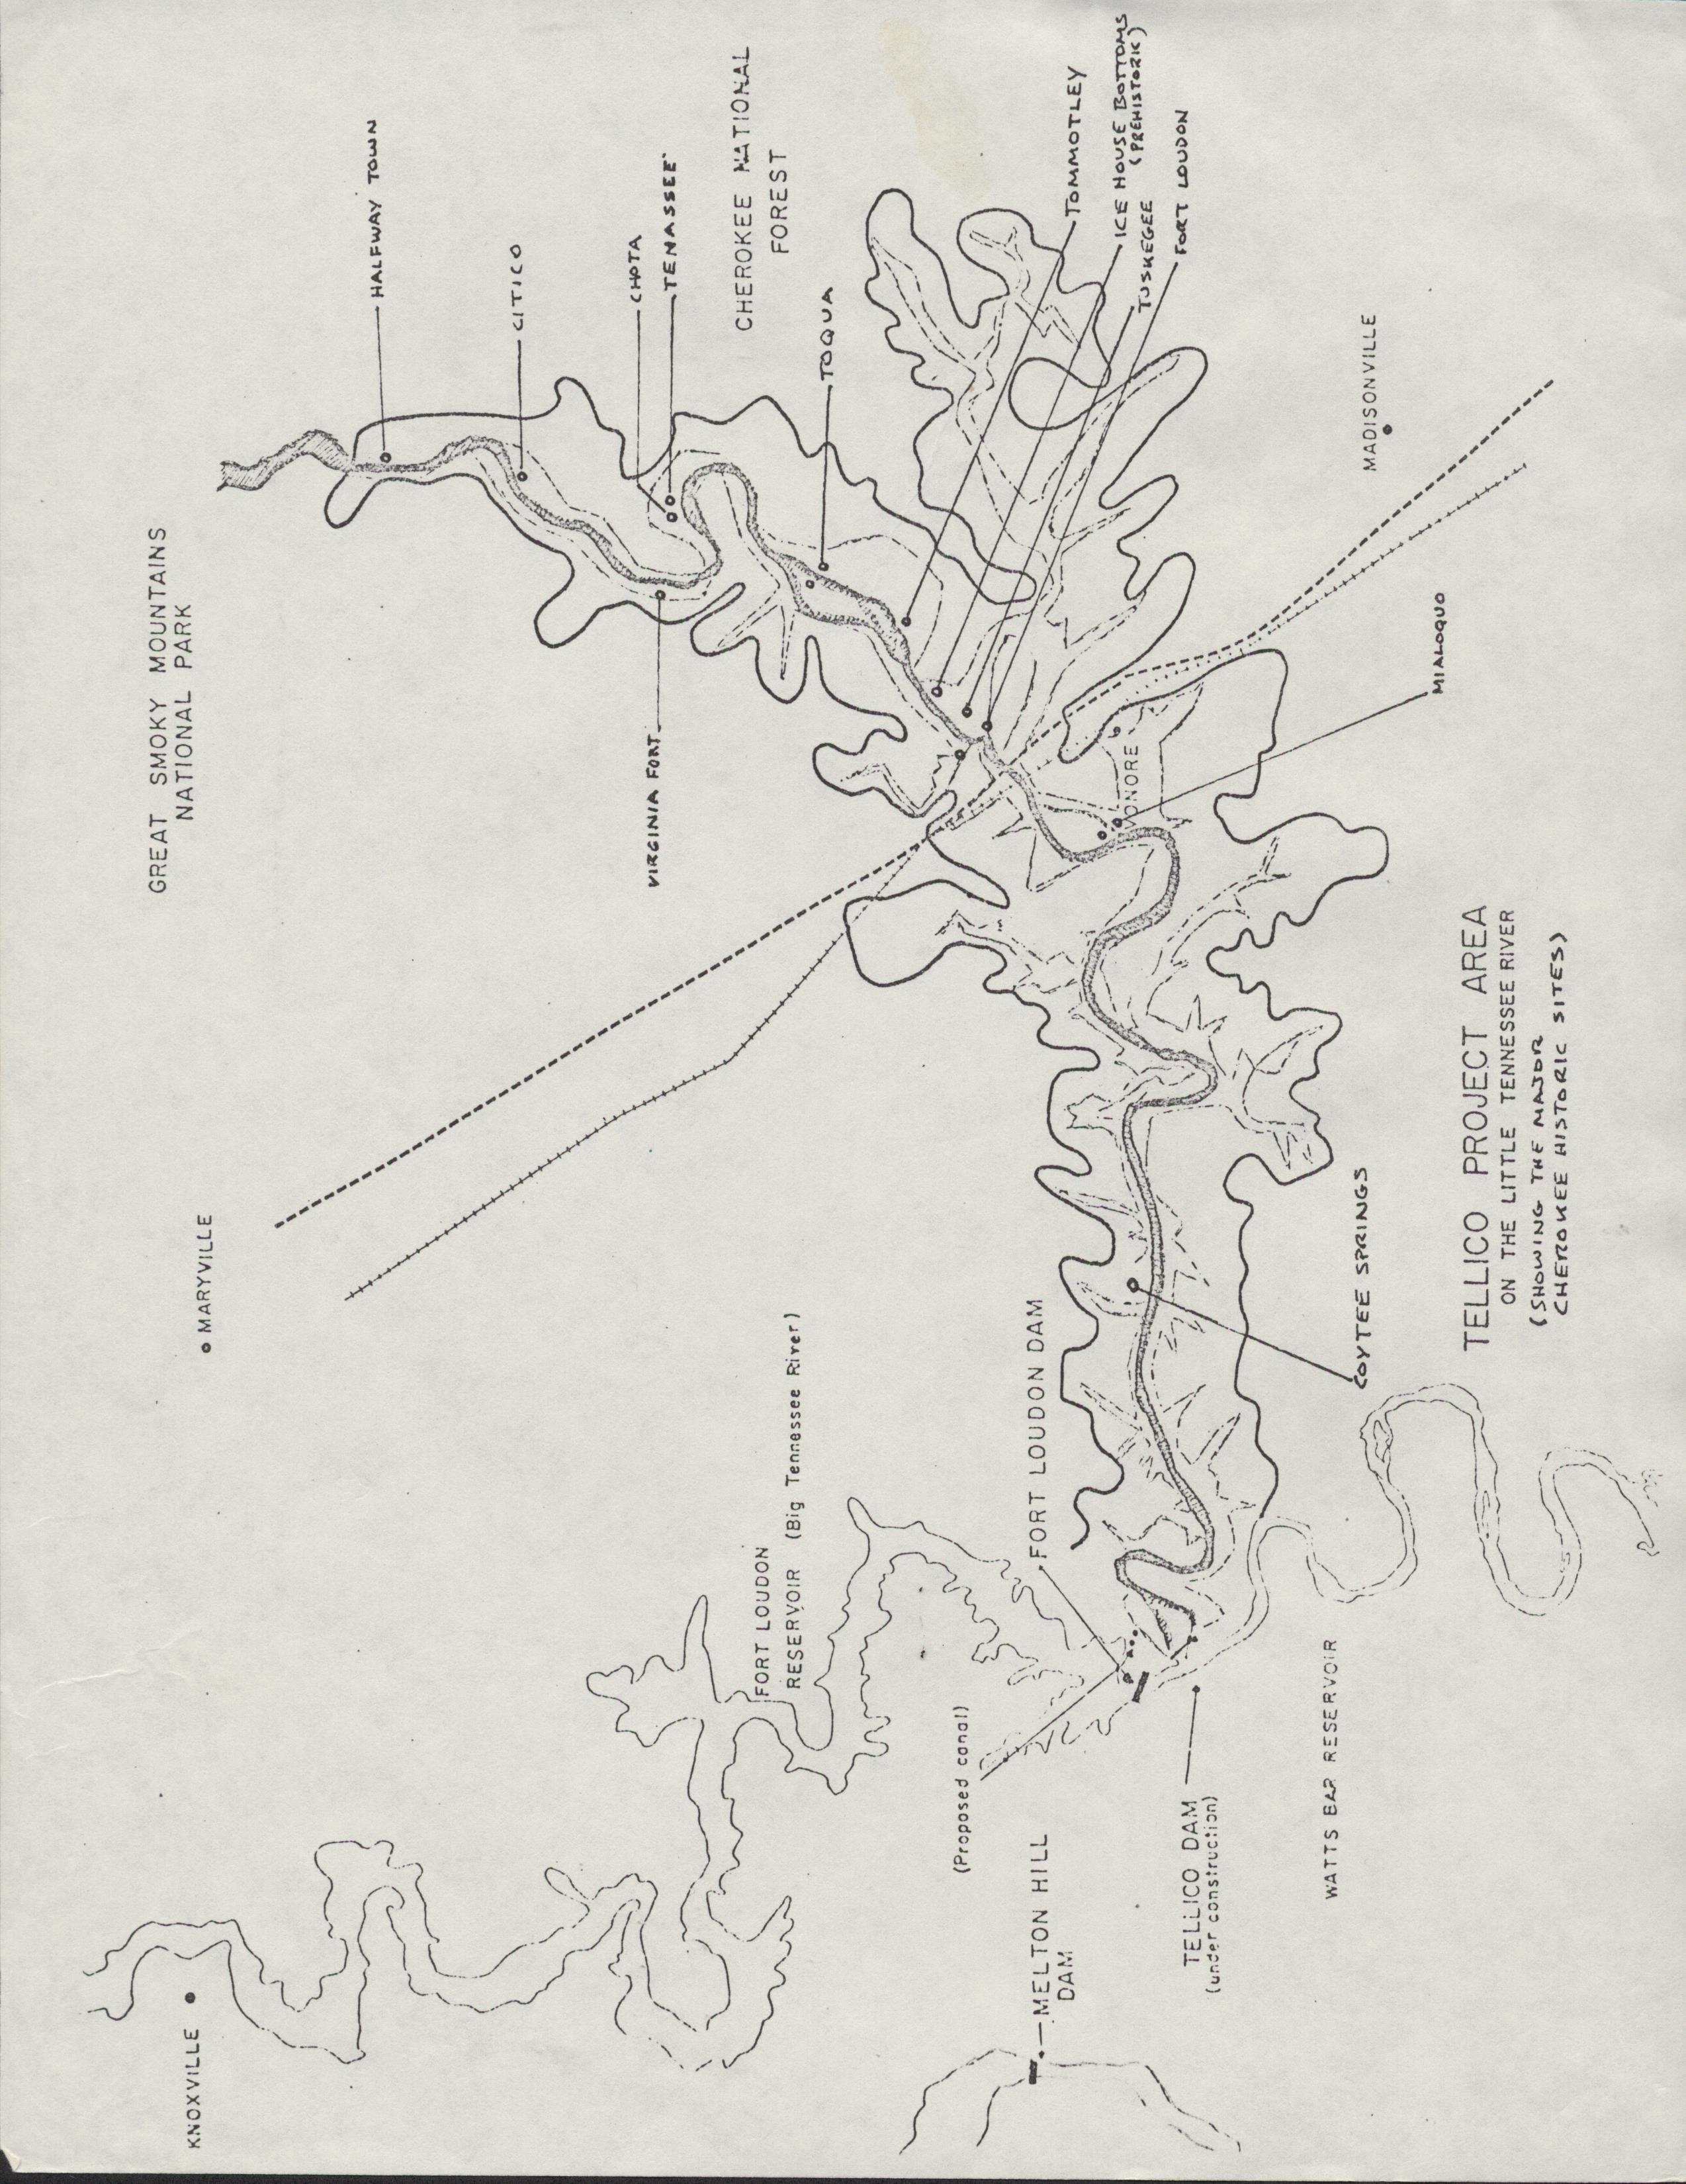 Black-and-white line drawing map of "Tellico Project Area on the Little Tennessee River (showing the major Cherokee historic sites)"